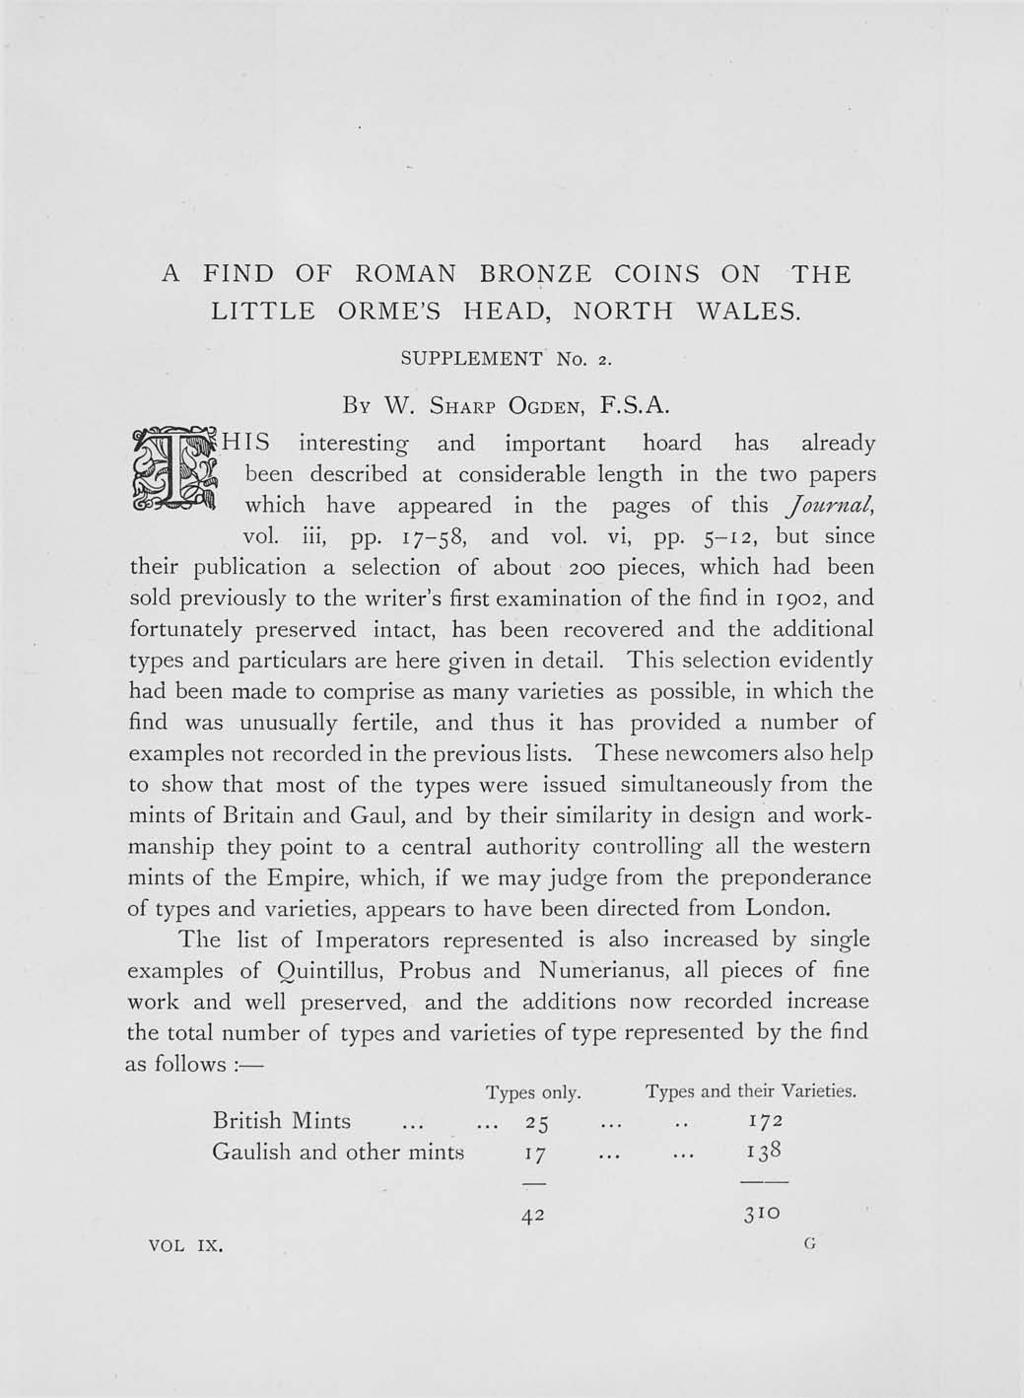 A FIND OF ROMAN BRONZE COINS ON THE LITTLE ORME'S HEAD, NORTH WALES. SUPPLEMENT No. 2. BY W. SHARP OGDEN, F.S.A. ;HIS interesting and important hoard has already been described at considerable length in the two papers which have appeared in the pages of this Journal', vol.